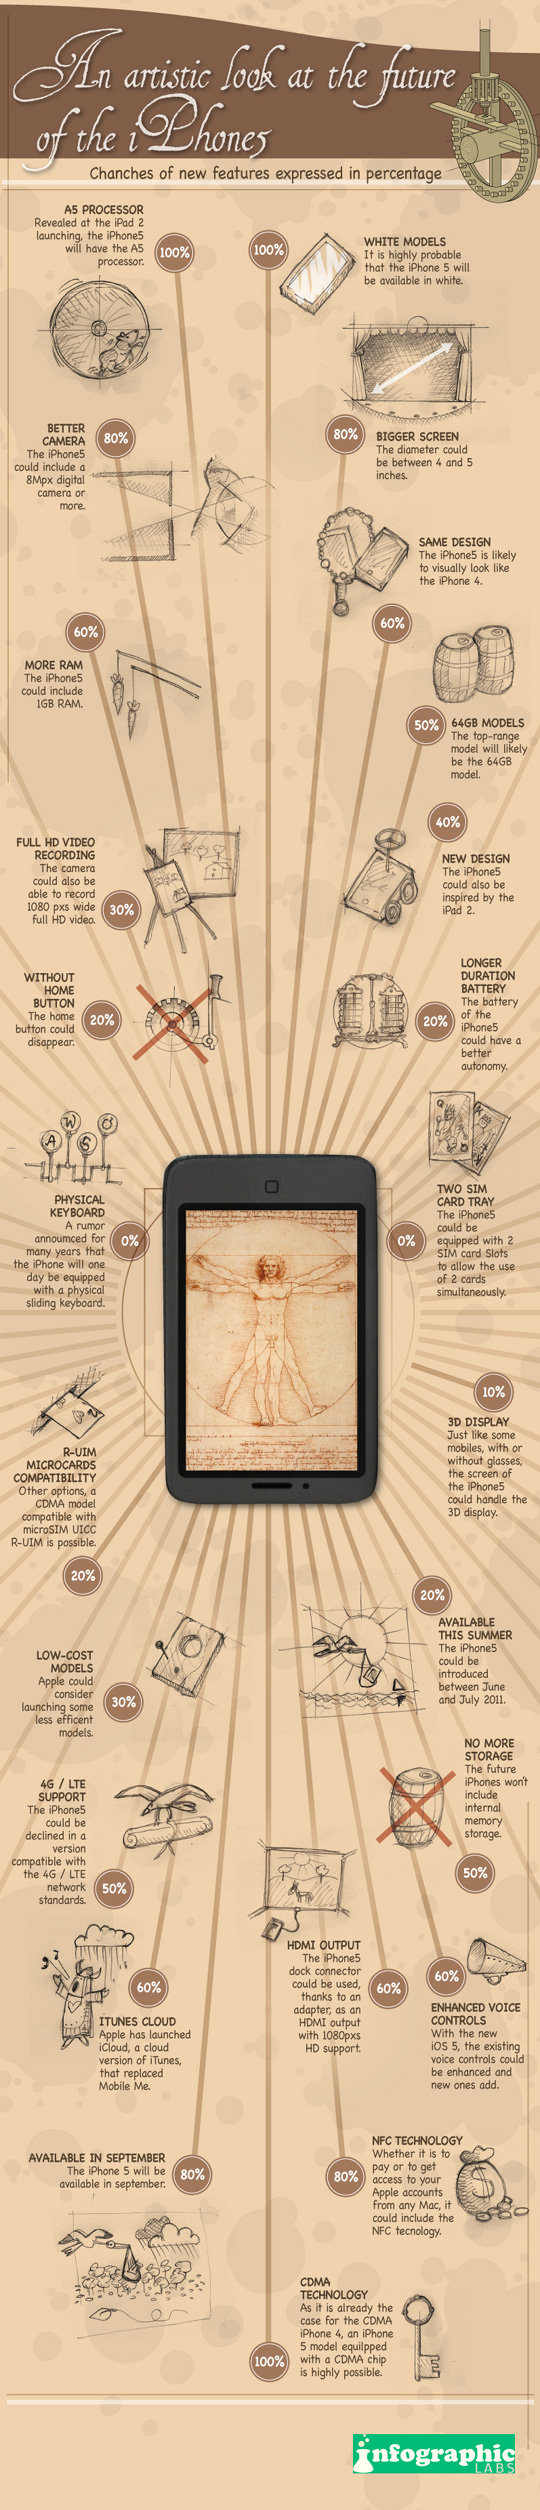 An Artistic Look At The iPhone 5 Speculation [Infographic] 2